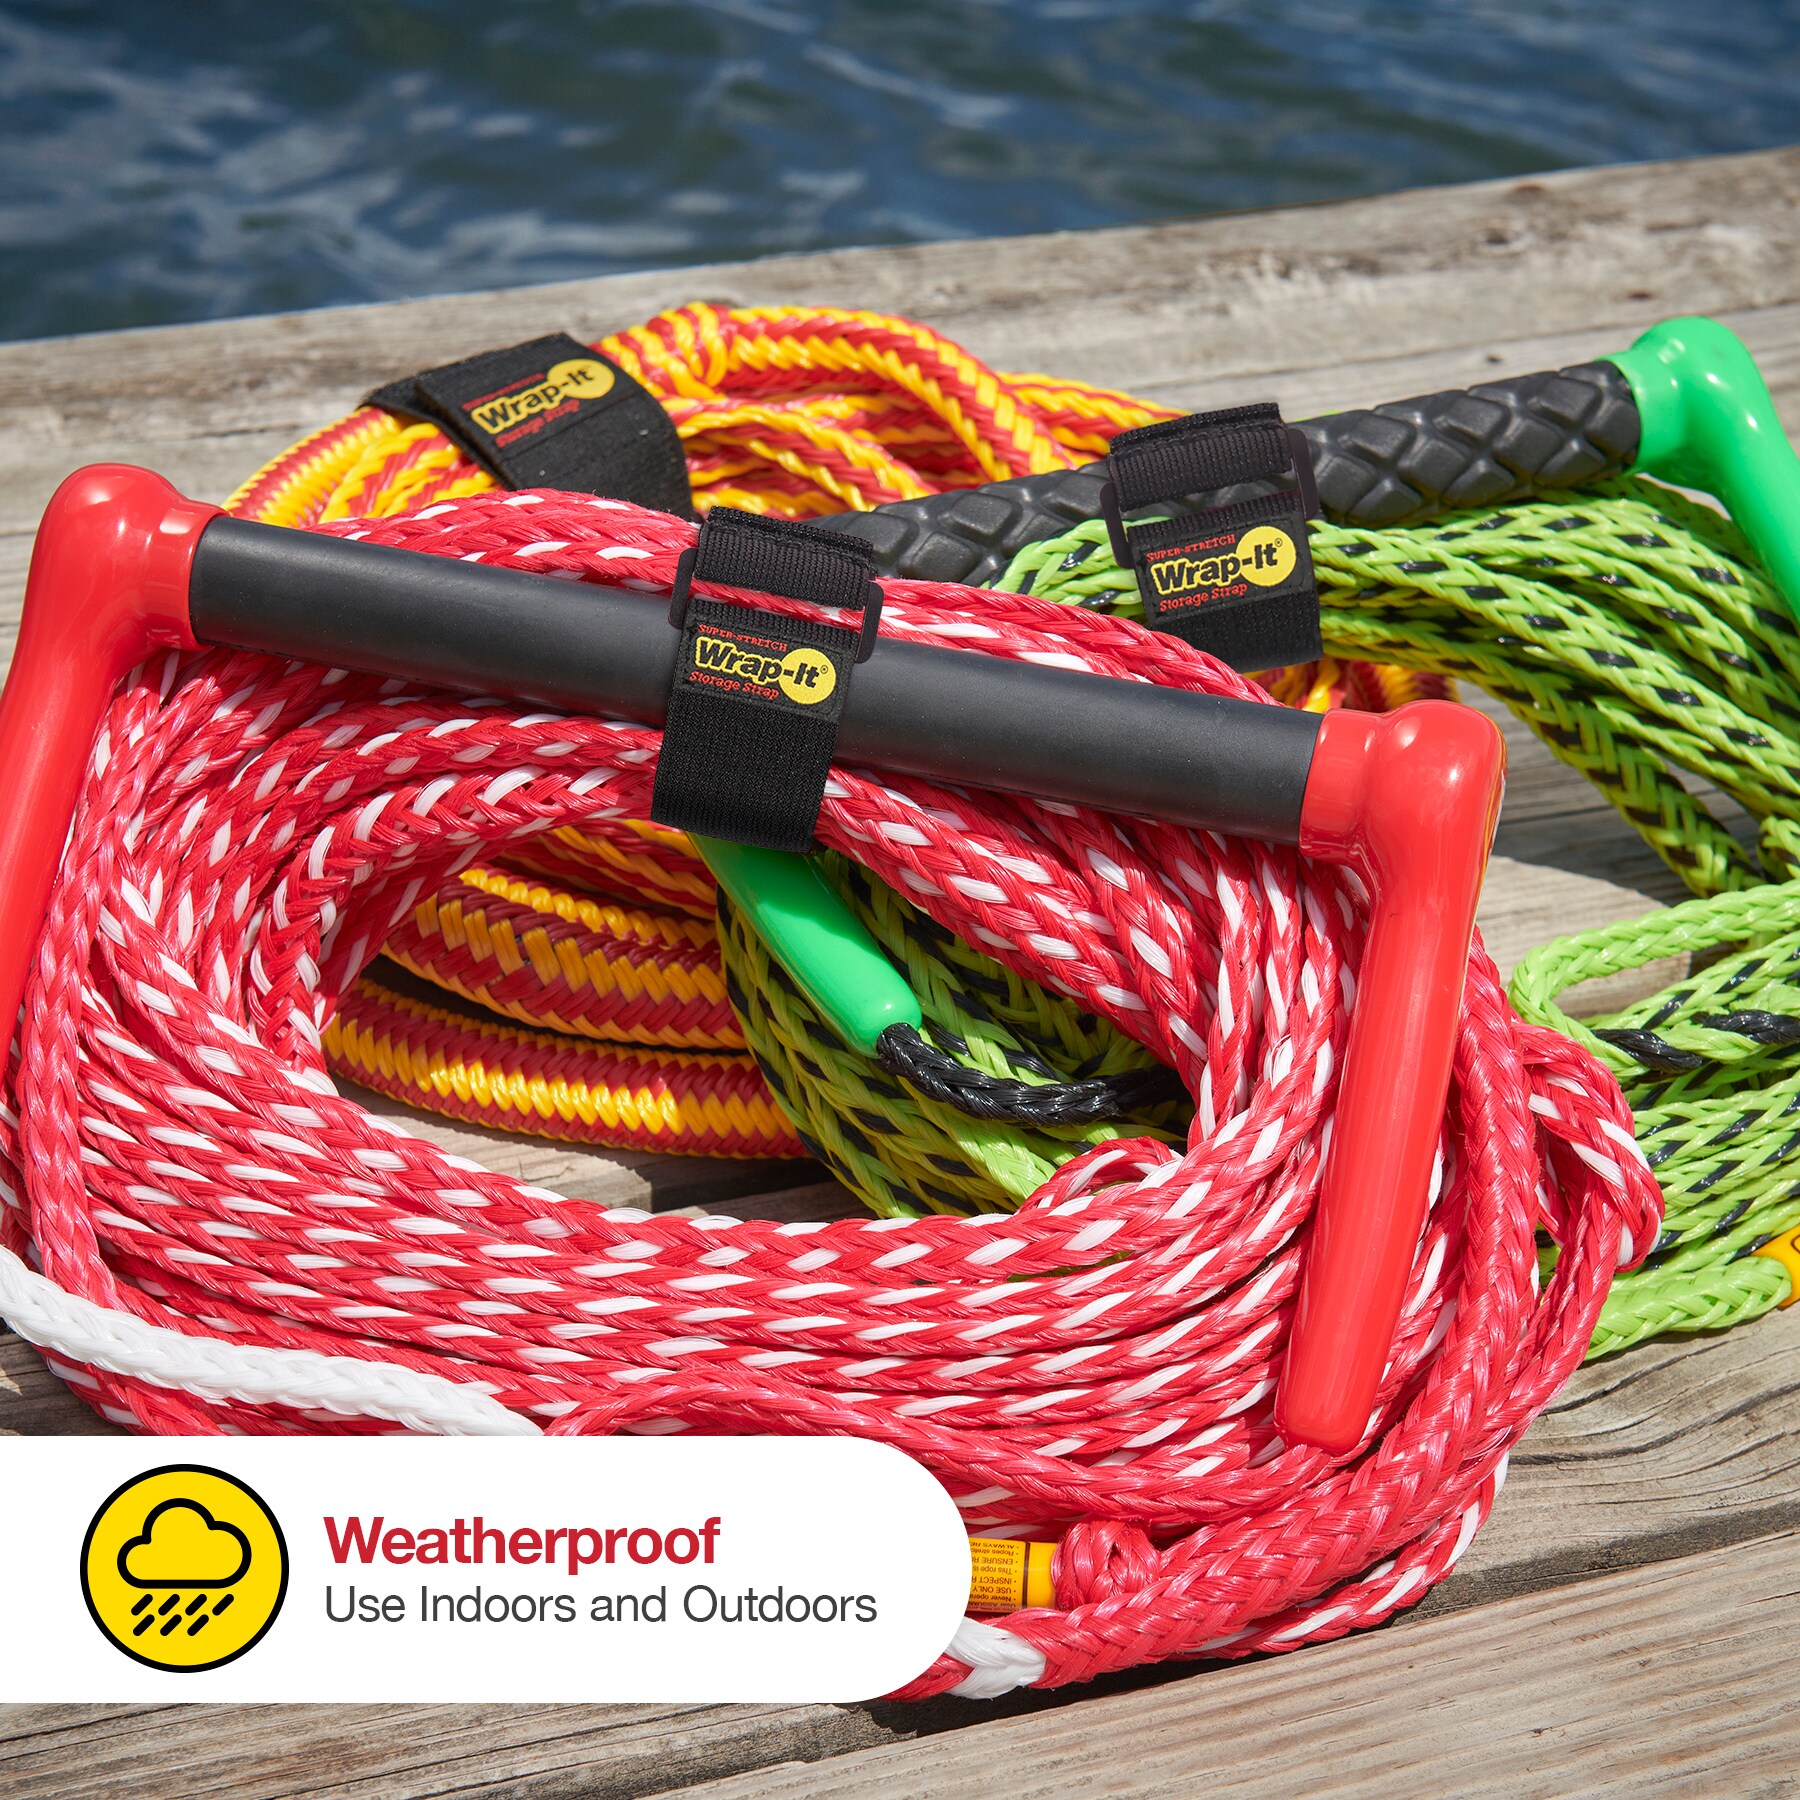 Wrap-It Easy-Carry Storage Strap for Carrying Cords, Hoses 22-in Black Hook  and Loop Fastener